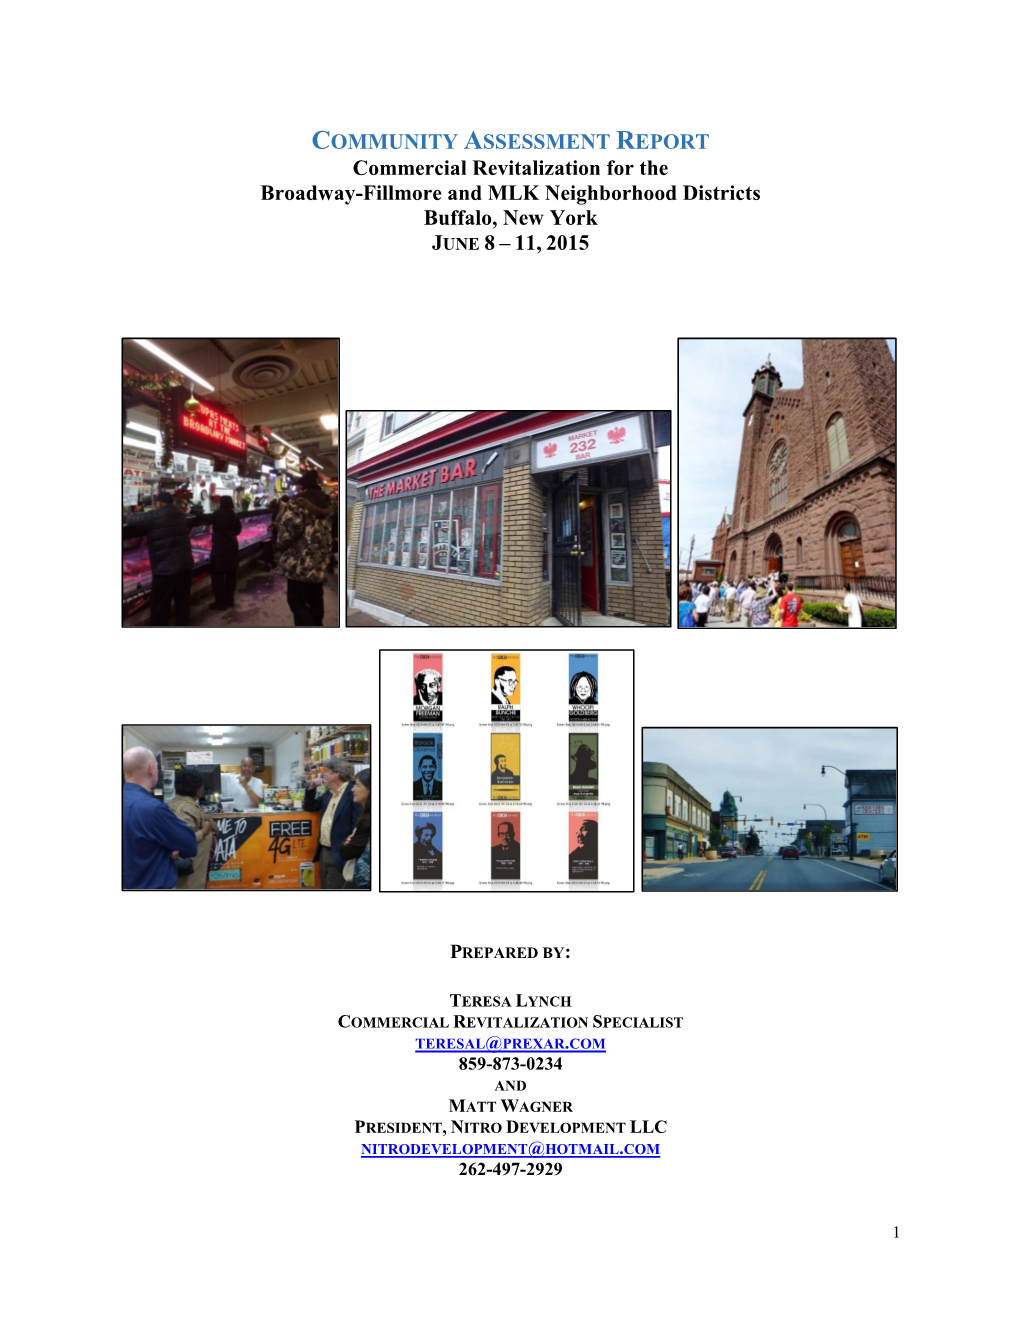 COMMUNITY ASSESSMENT REPORT Commercial Revitalization for the Broadway-Fillmore and MLK Neighborhood Districts Buffalo, New York JUNE 8 – 11, 2015